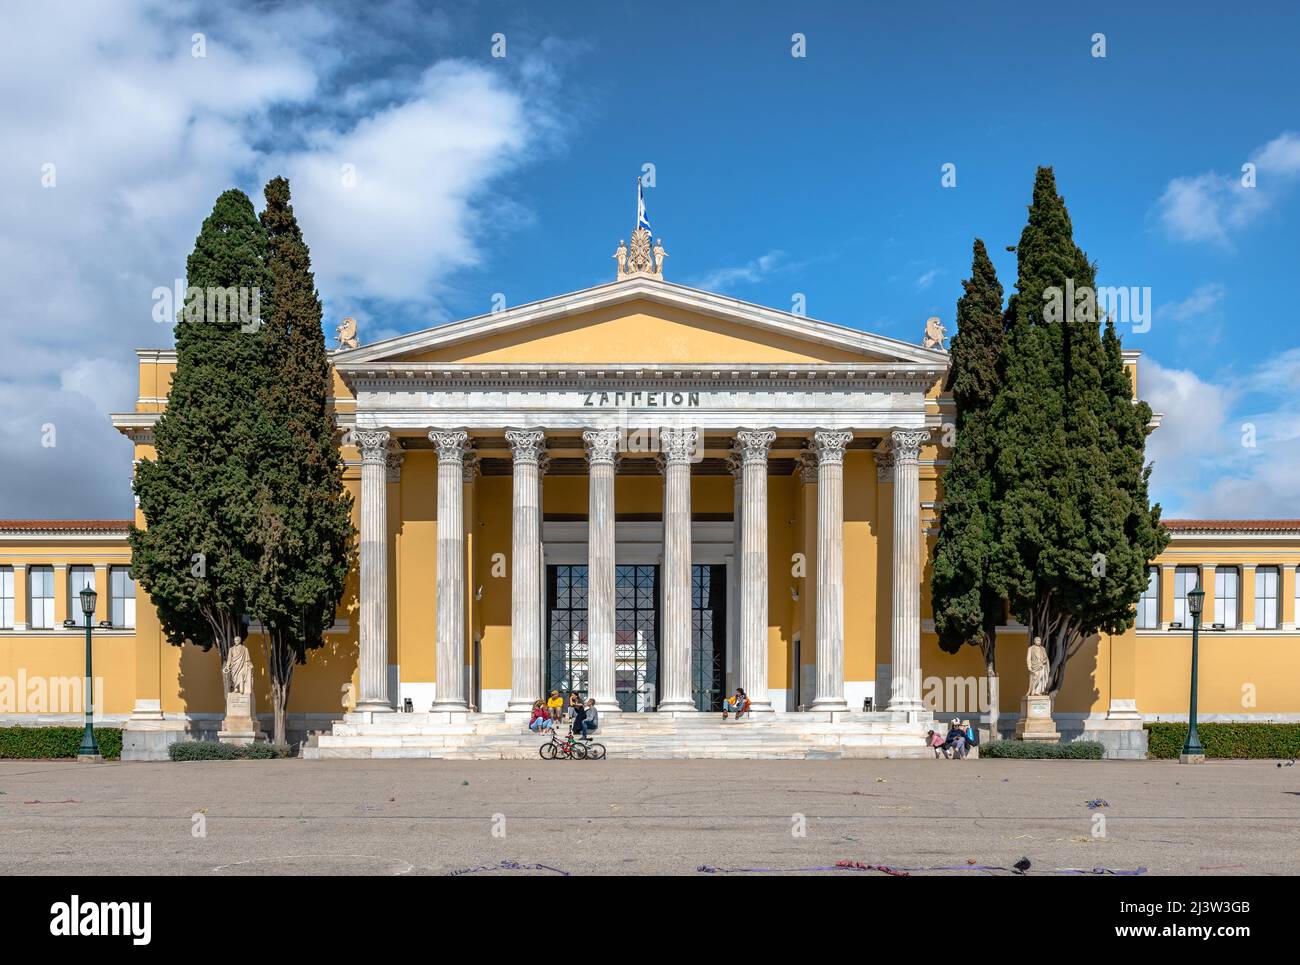 The facade of Zappeio, a palatial building next to the National Gardens of Athens in the heart of the city of Athens, Greece. Stock Photo